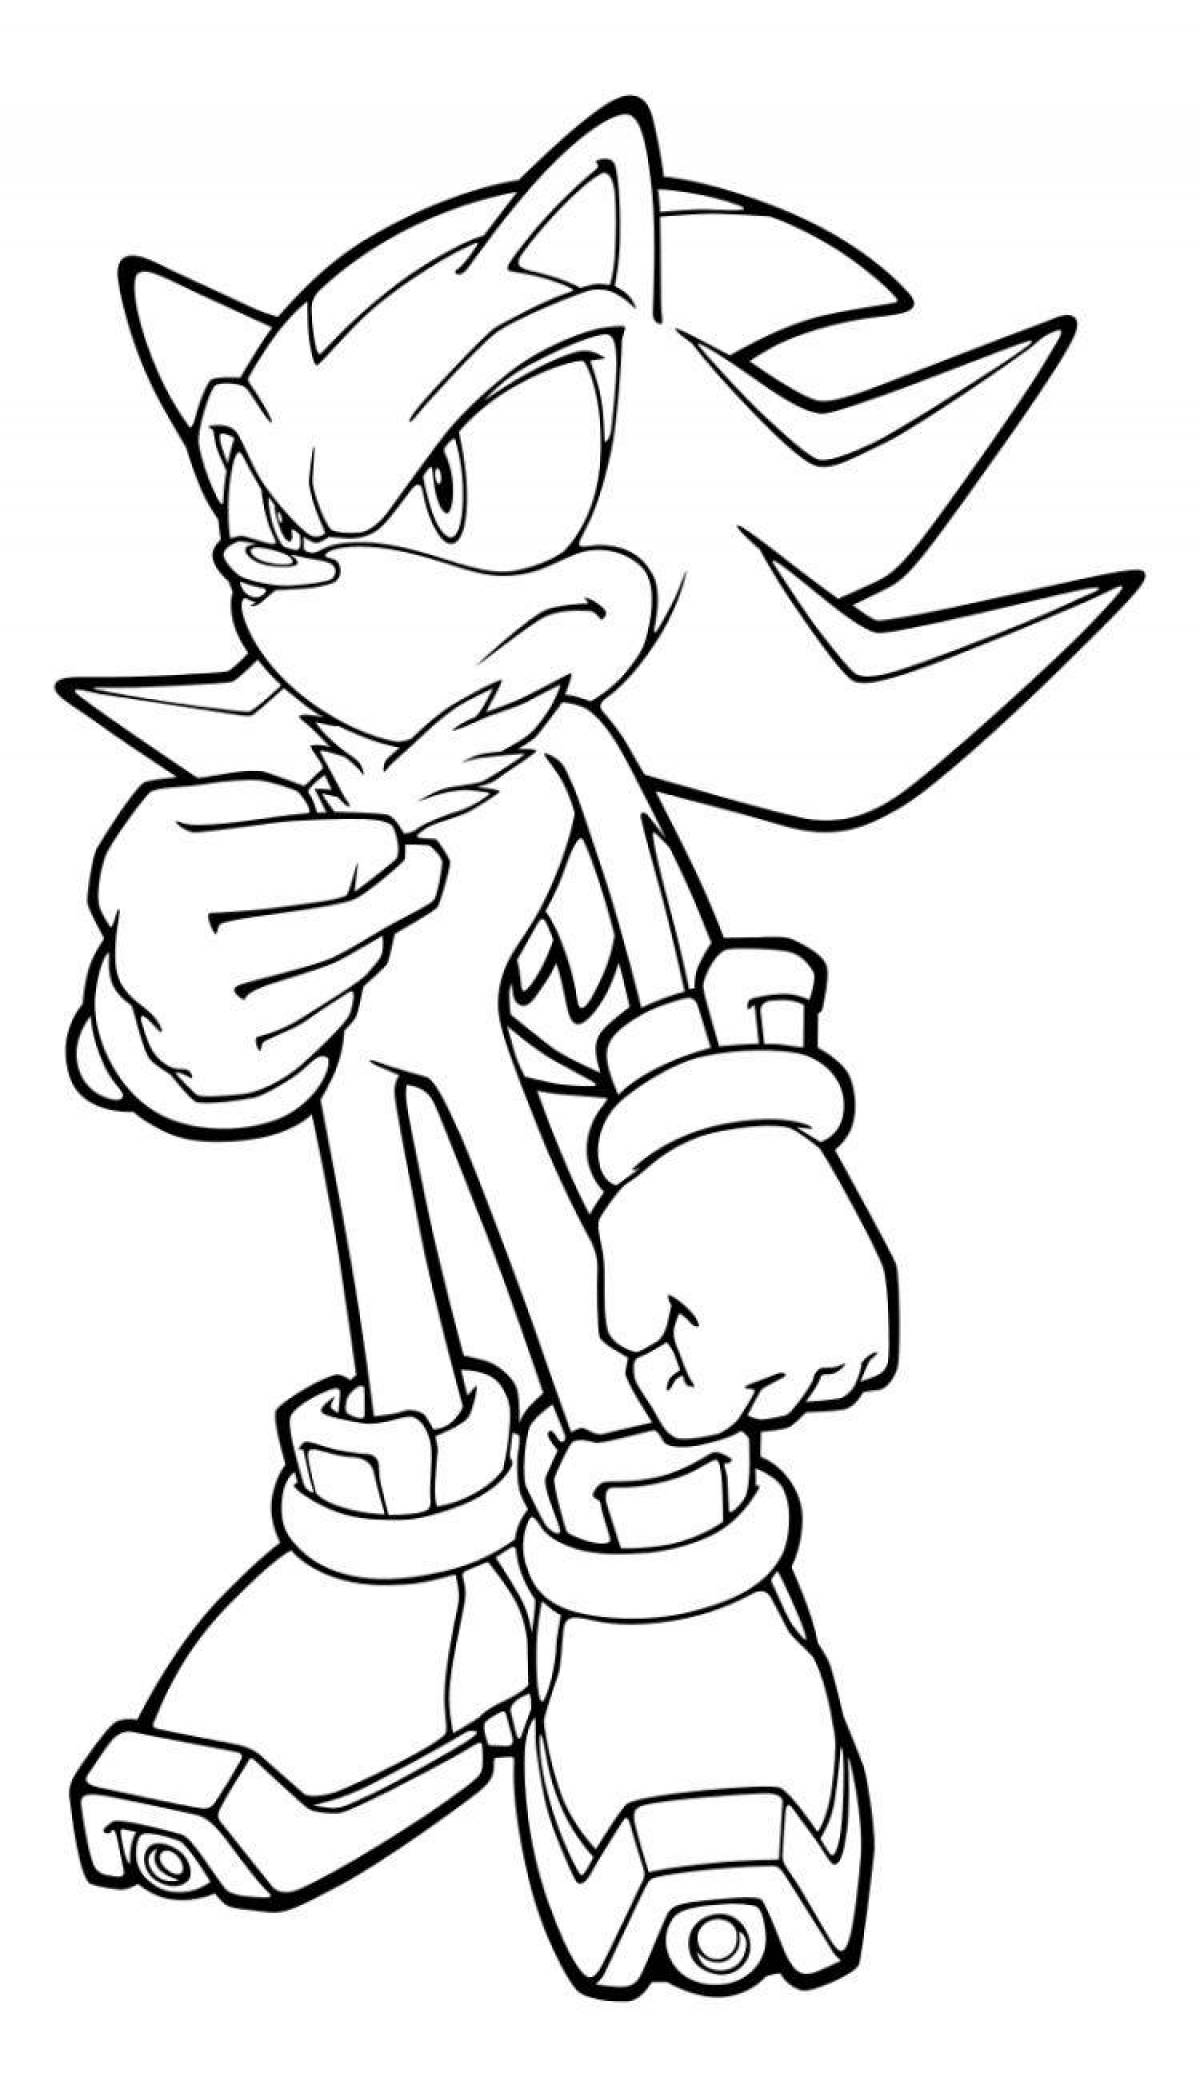 Charming golden sonic coloring